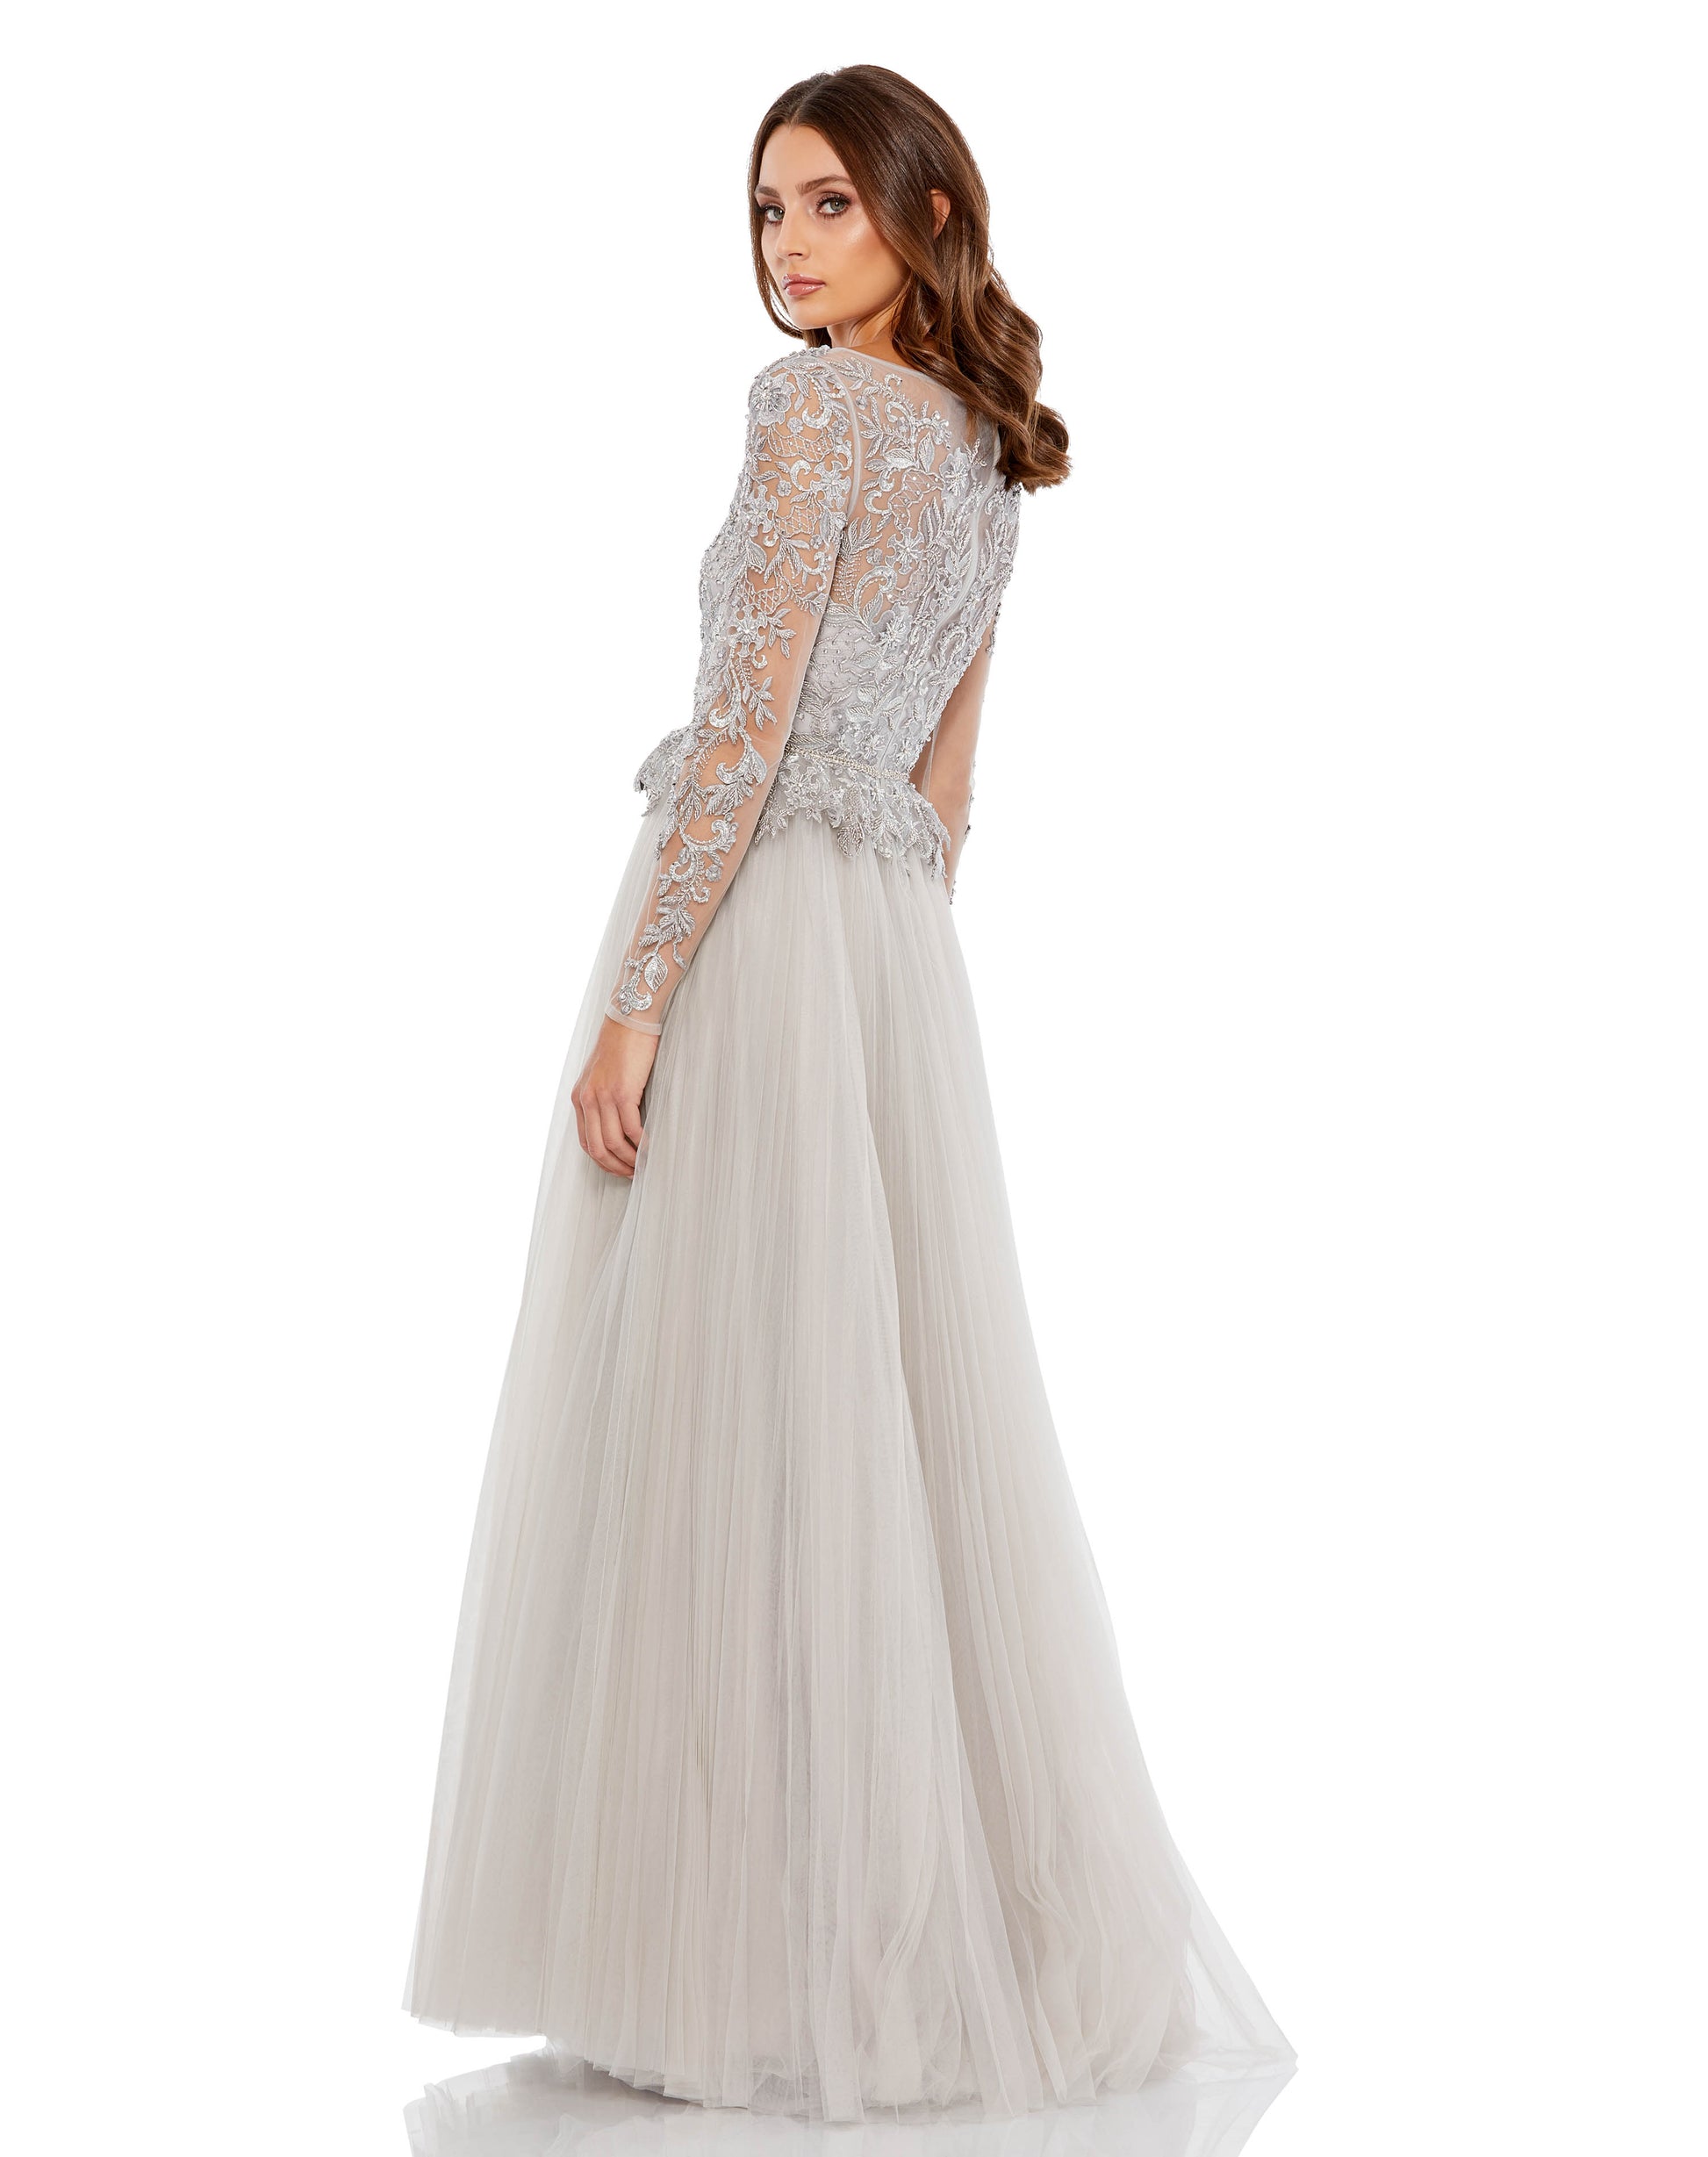 Regal long-sleeved lace ballgown with floral applique accents, peplum waist, semi-sheer back, and a full-length flowing skirt. Mac Duggal Partially lined Back Zipper 100% Polyester Long Sleeve Floor Length Style #11168